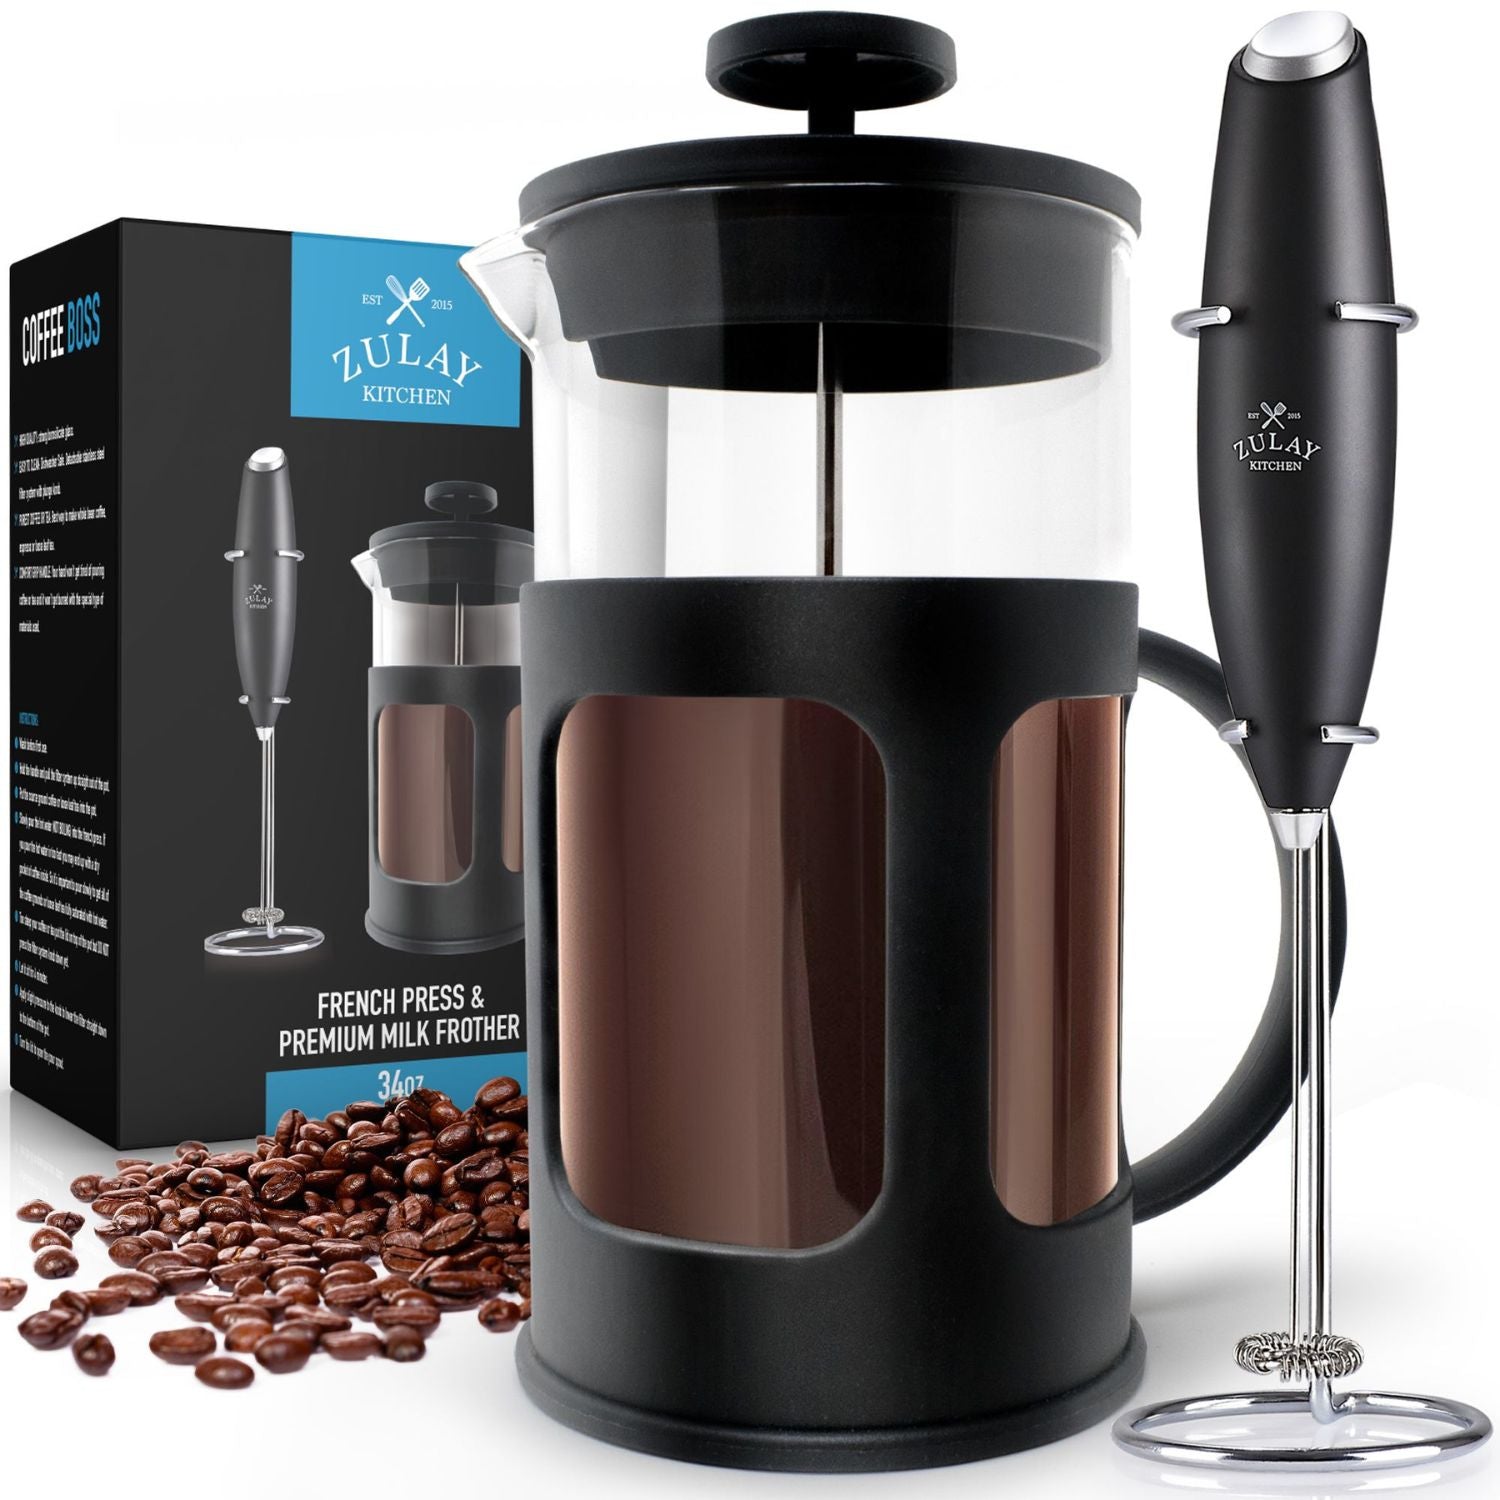 Zulay Kitchen Premium French Press Coffee Pot and Stainless Steel Milk Frother Set - 8 Cups 34oz, Black